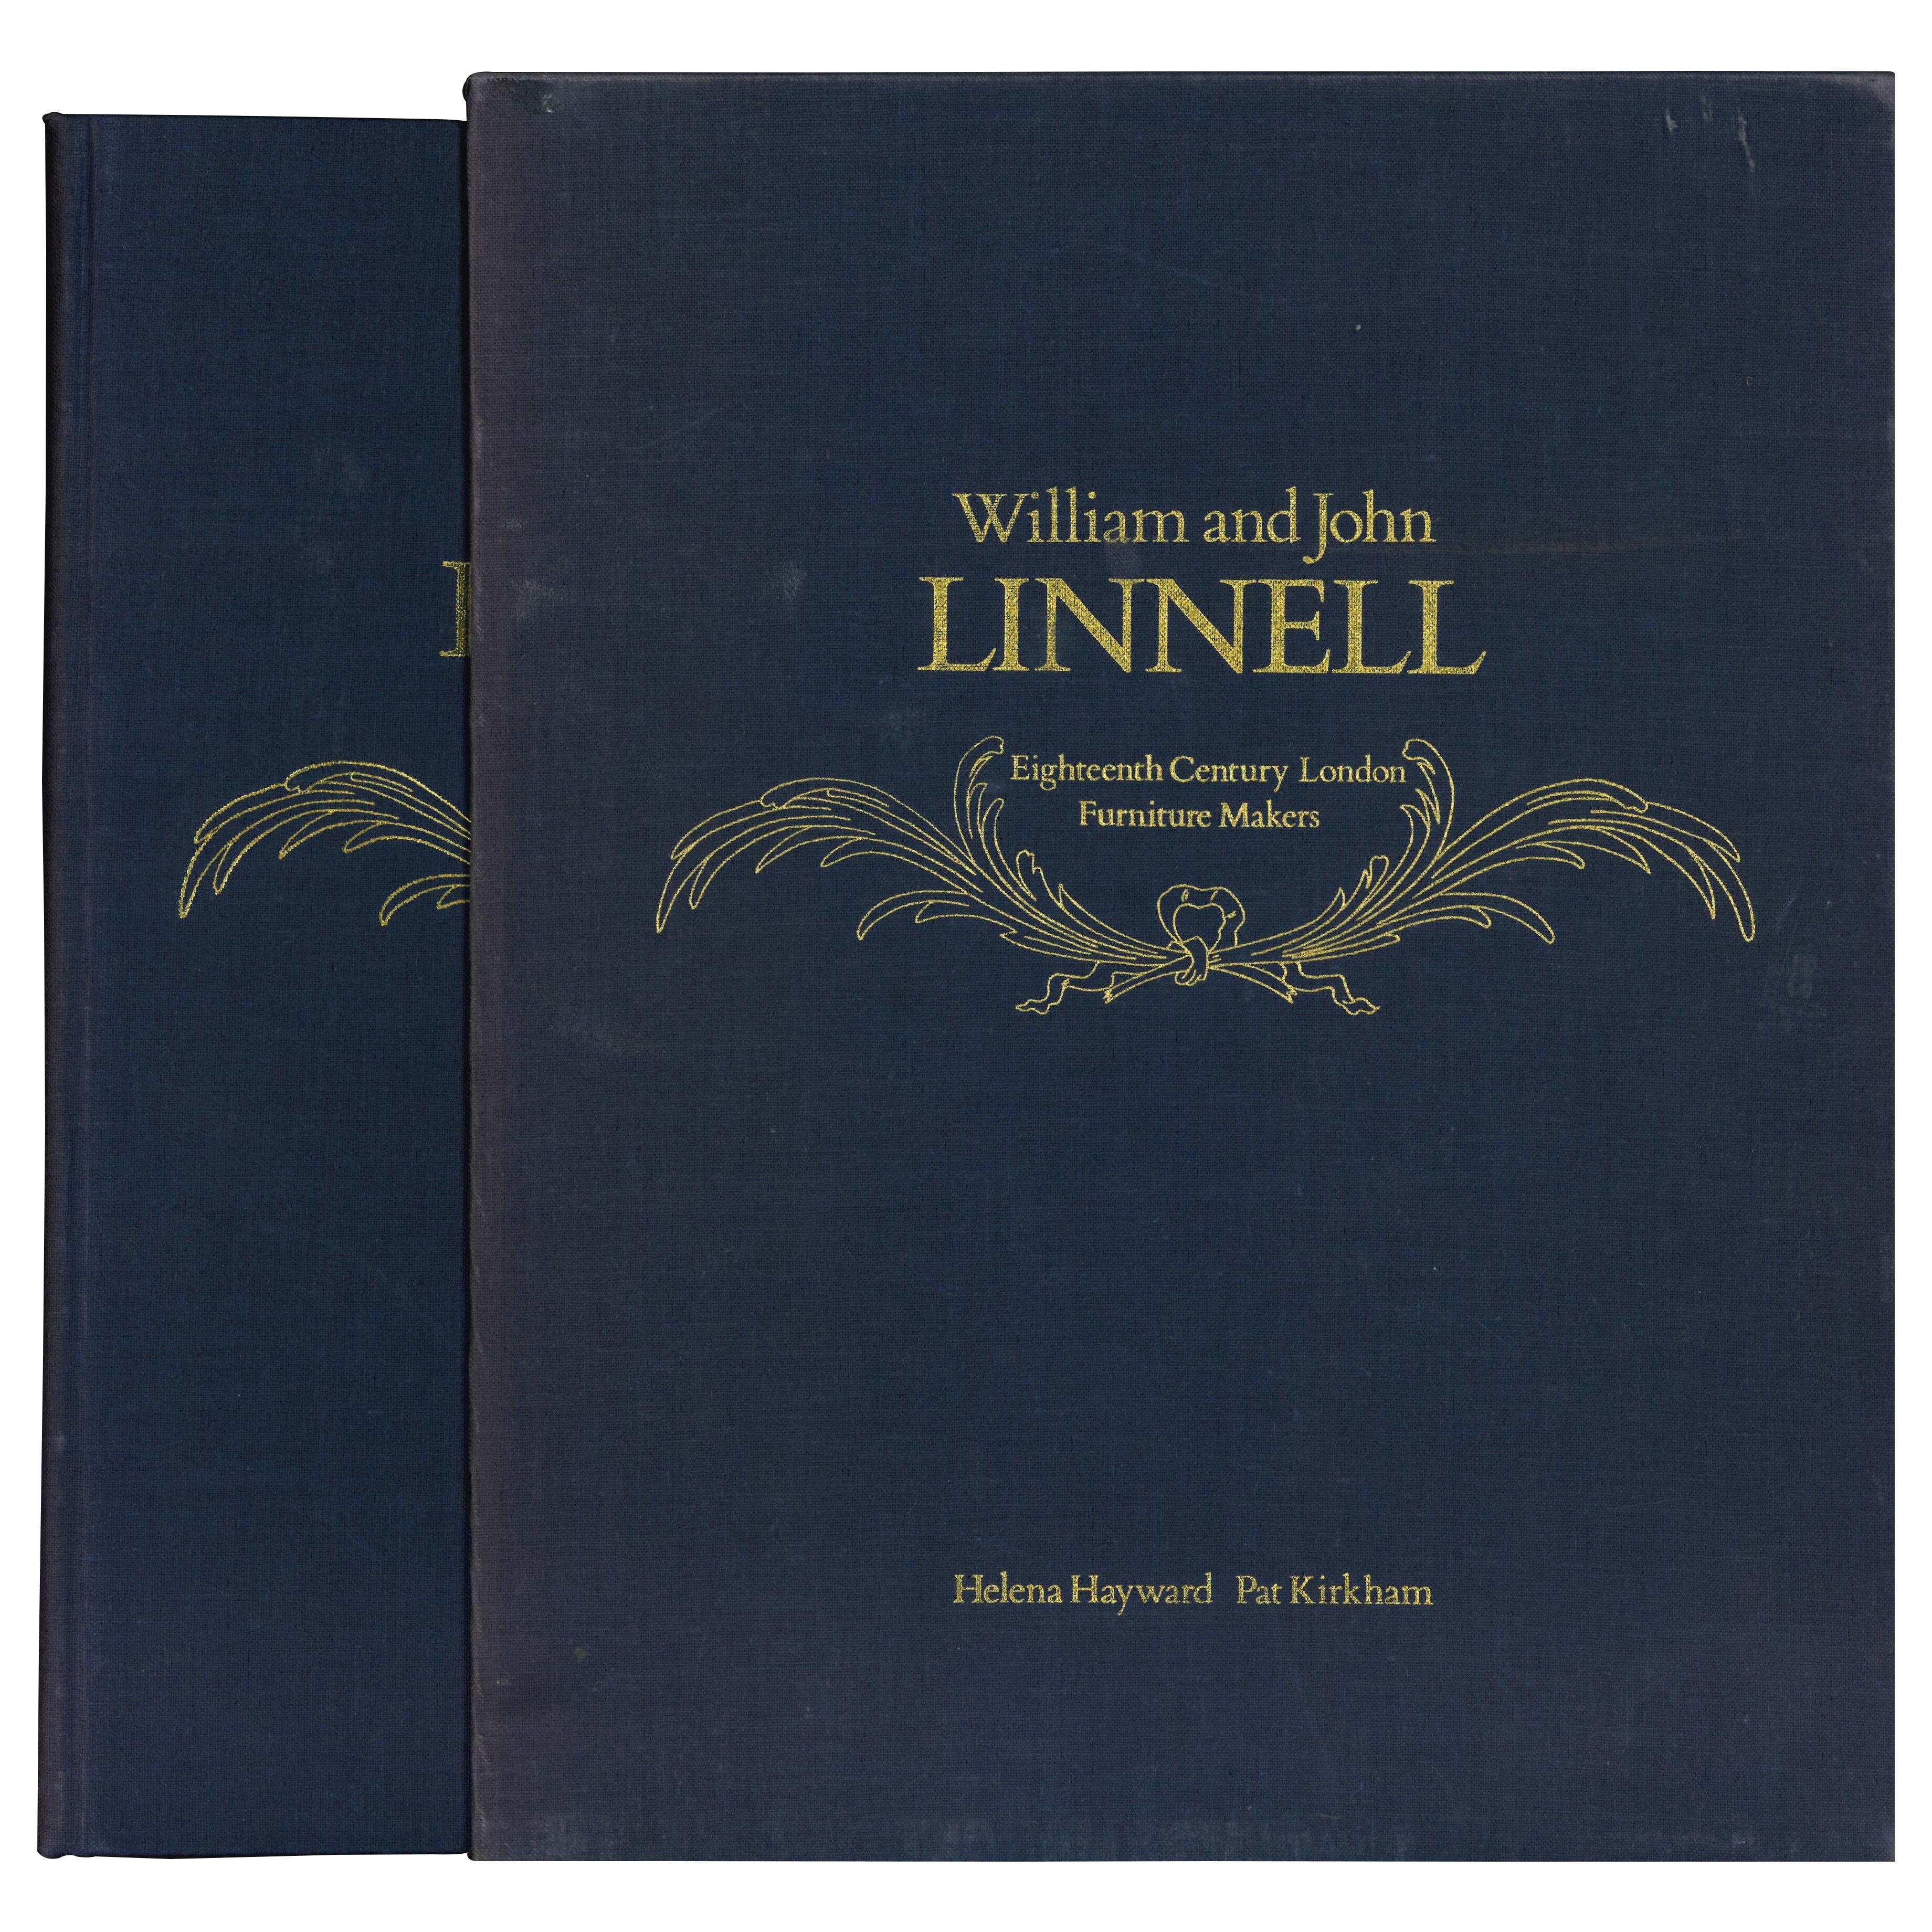 William and John Linnell - Eighteenth Century London Furniture Makers. 2 Books